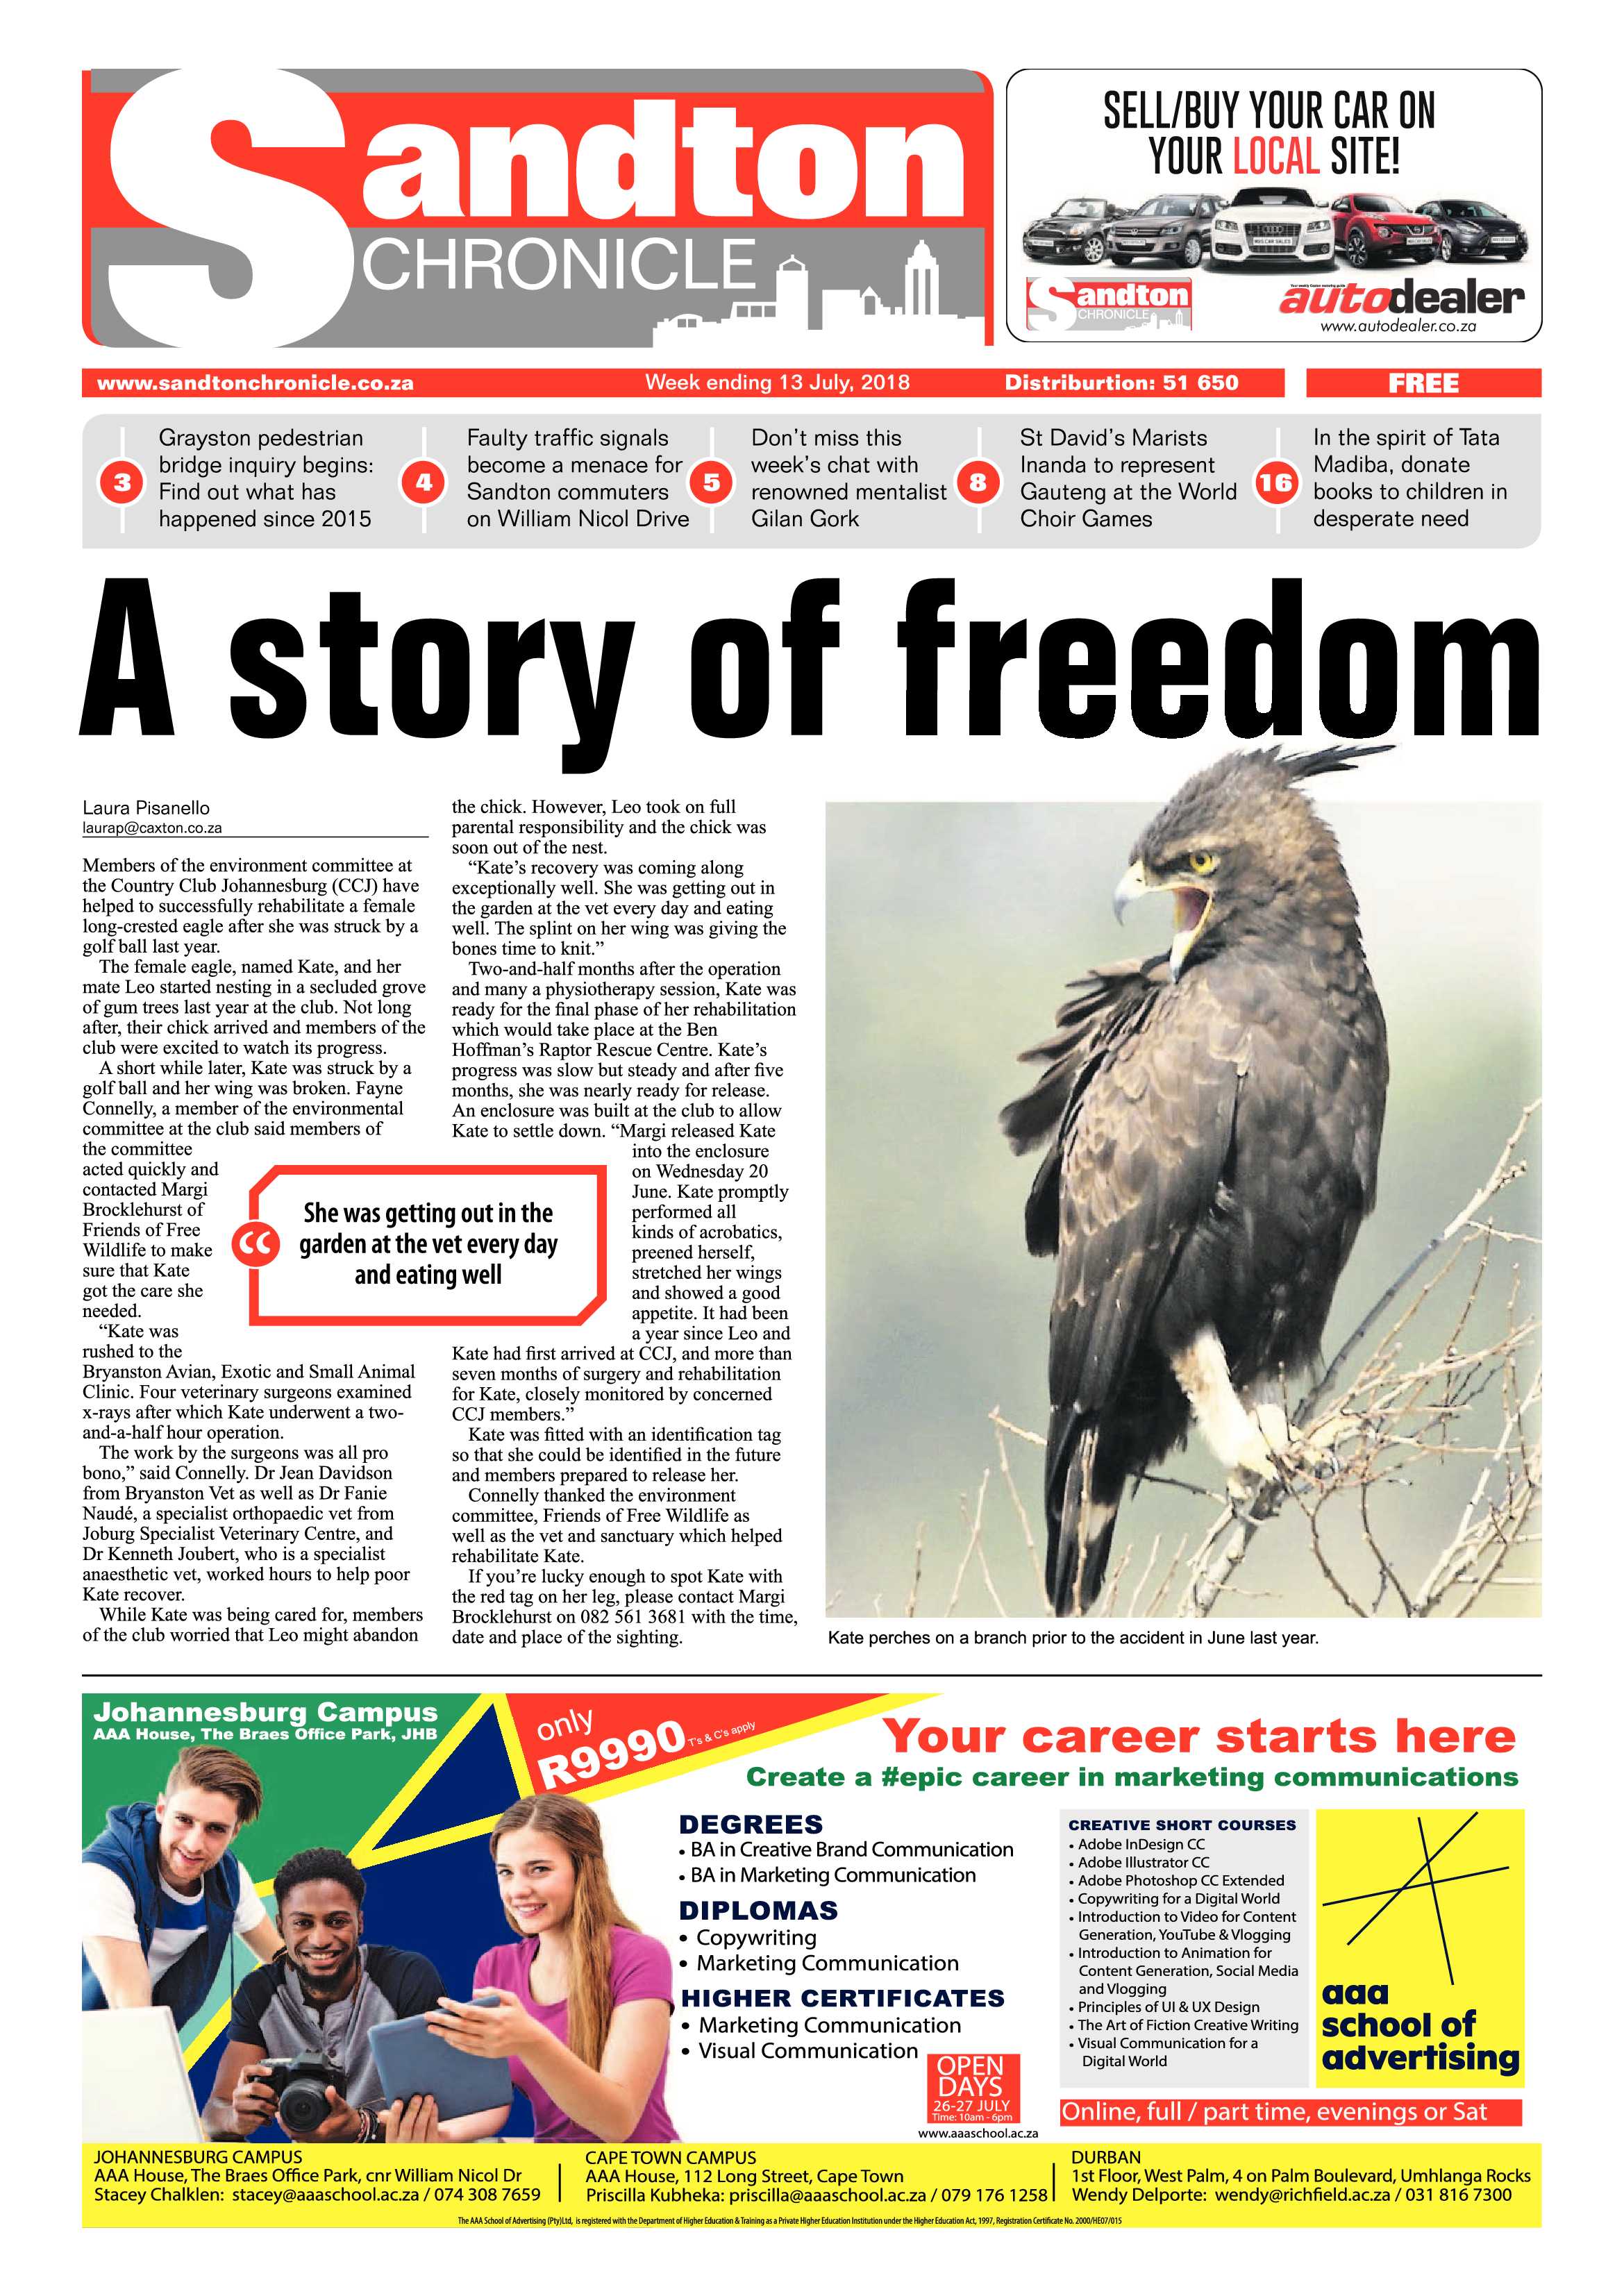 Sandton Chronicle 13 July, 2018 page 1